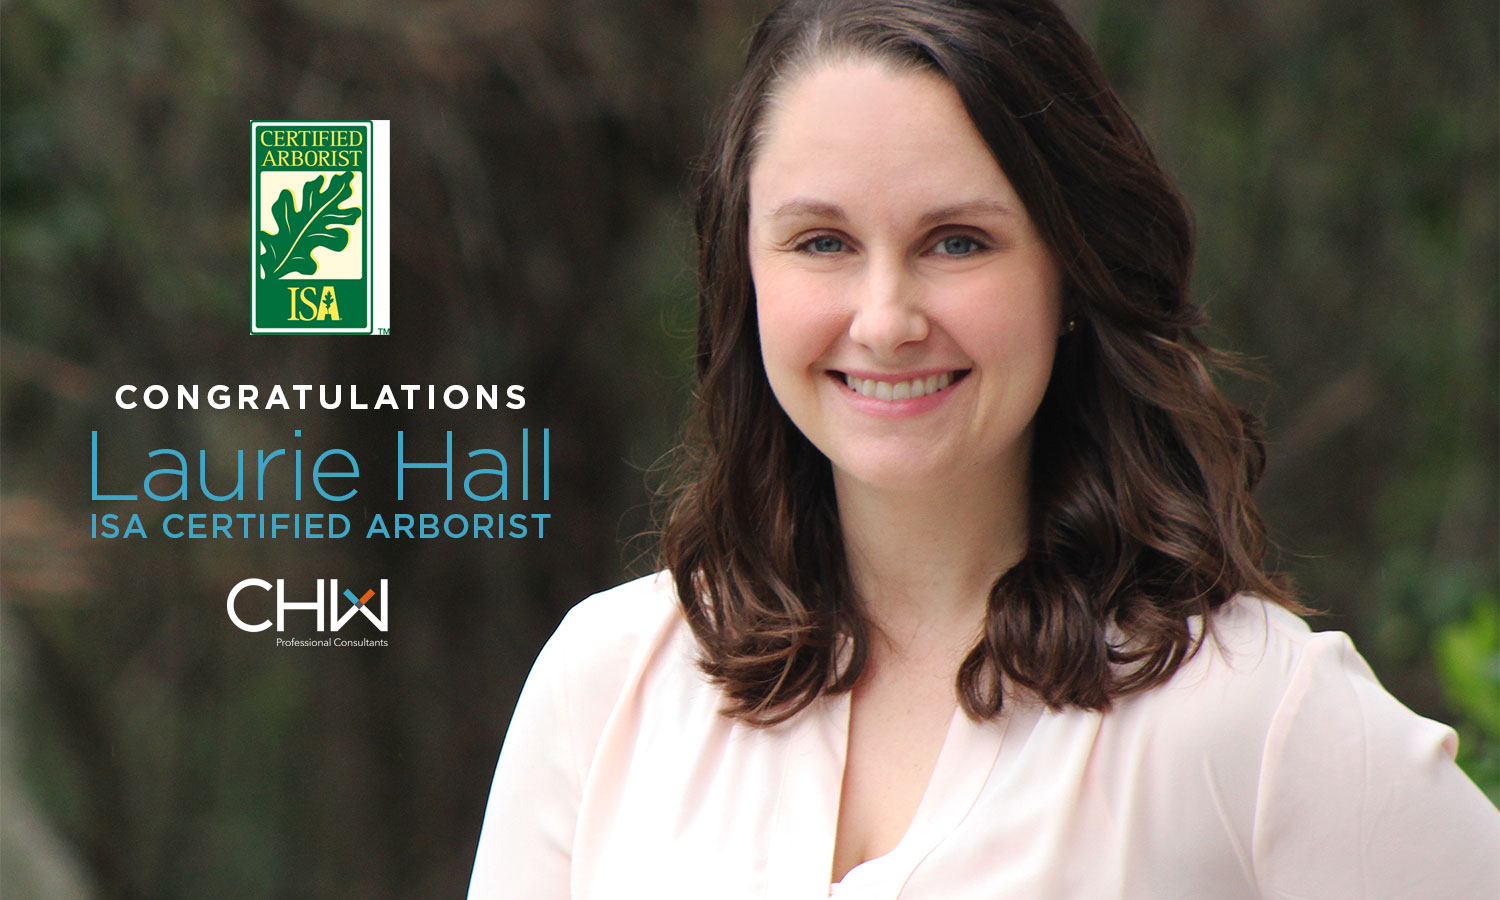 Congratulations to Laurie Hall, Director of Landscape Architecture, who added ISA Certified Arborist to her list of accomplishments recently!